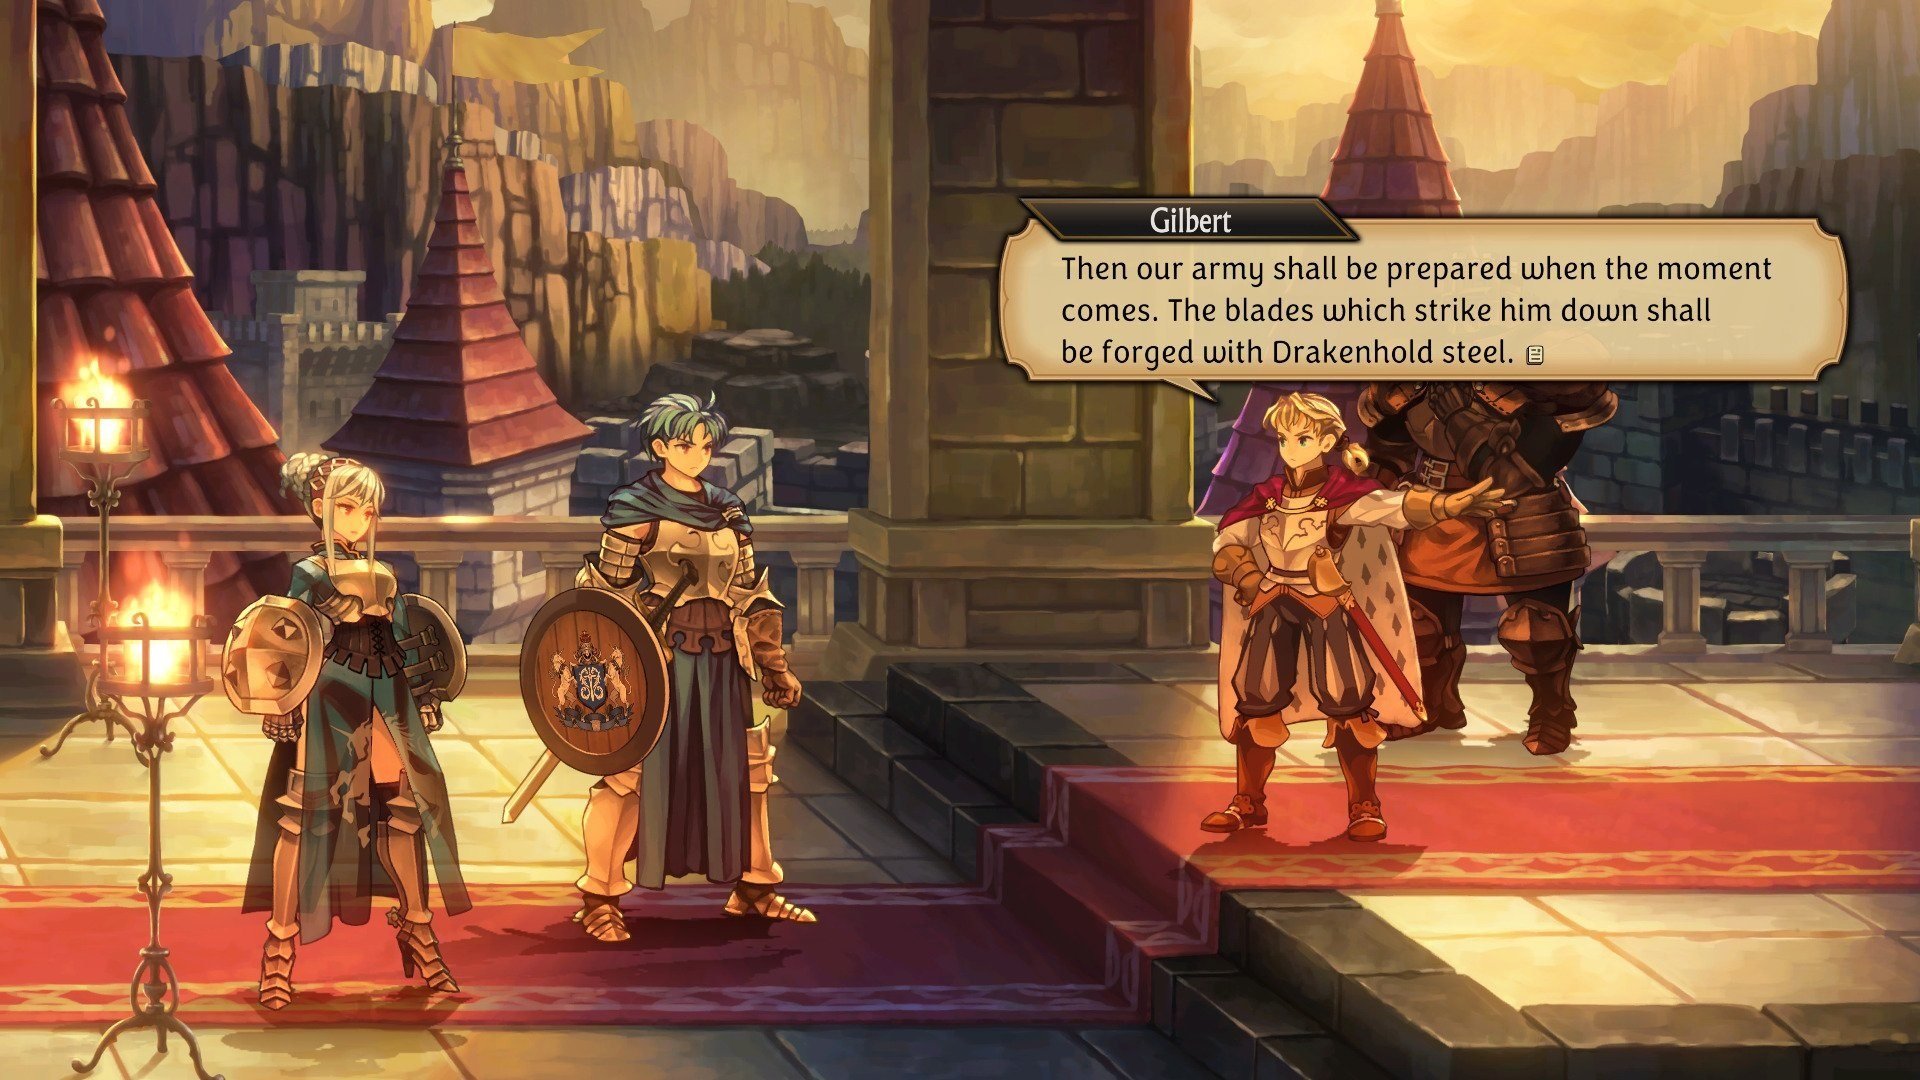 In Unicorn Overlord, the new high-fantasy tactical RPG game from Vanillaware available on PS5, PS4, Xbox Series X/S and Nintendo Switch, players build a rebel army from scratch to free the world of Fevrith from a tyrant’s grasp. Photo: Vanillaware